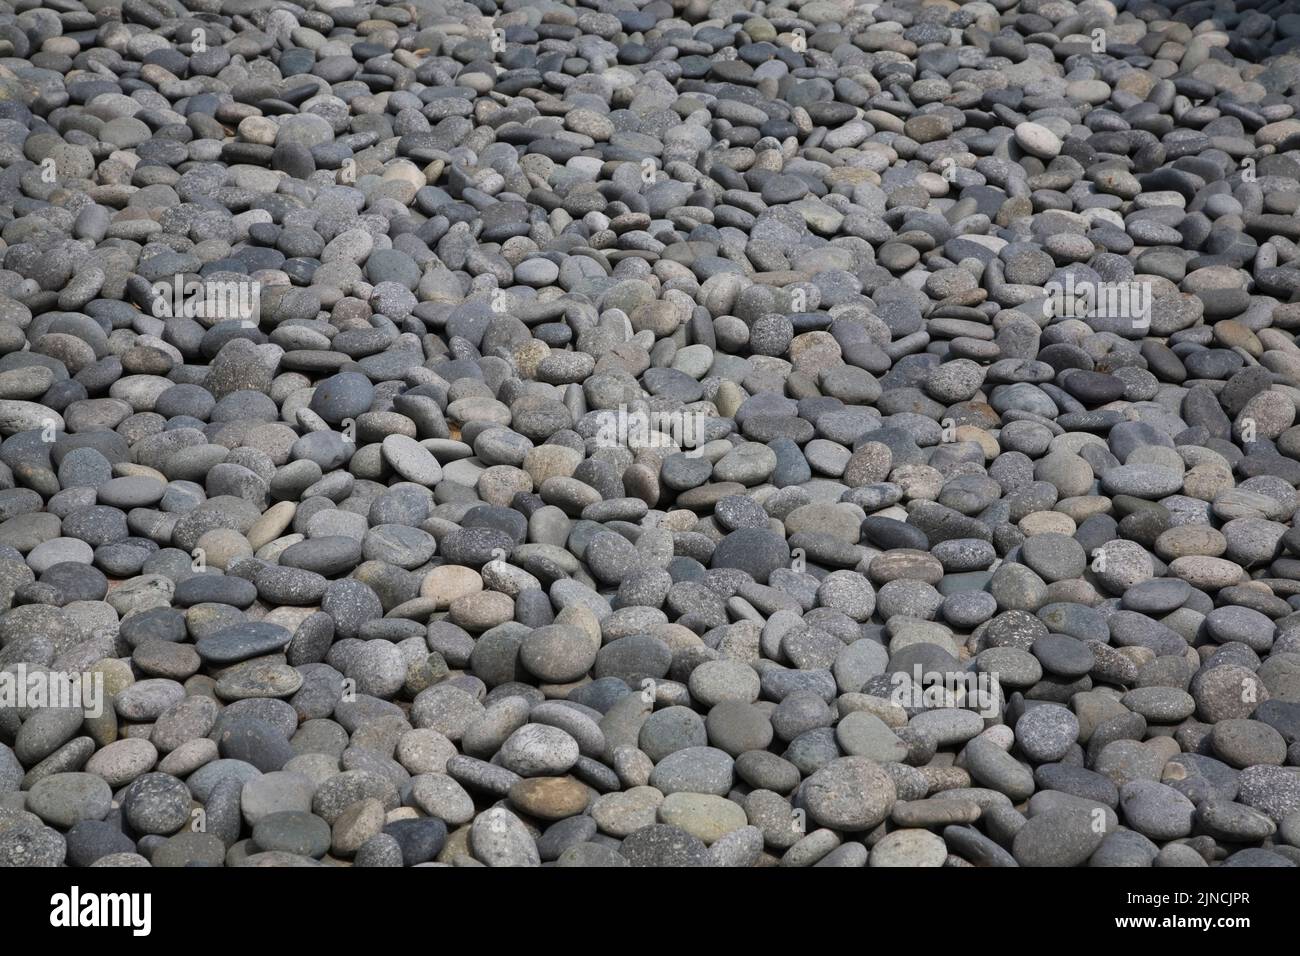 Close-up of smooth decorative stones in Japanese Rock garden, Quebec, Canada. Stock Photo